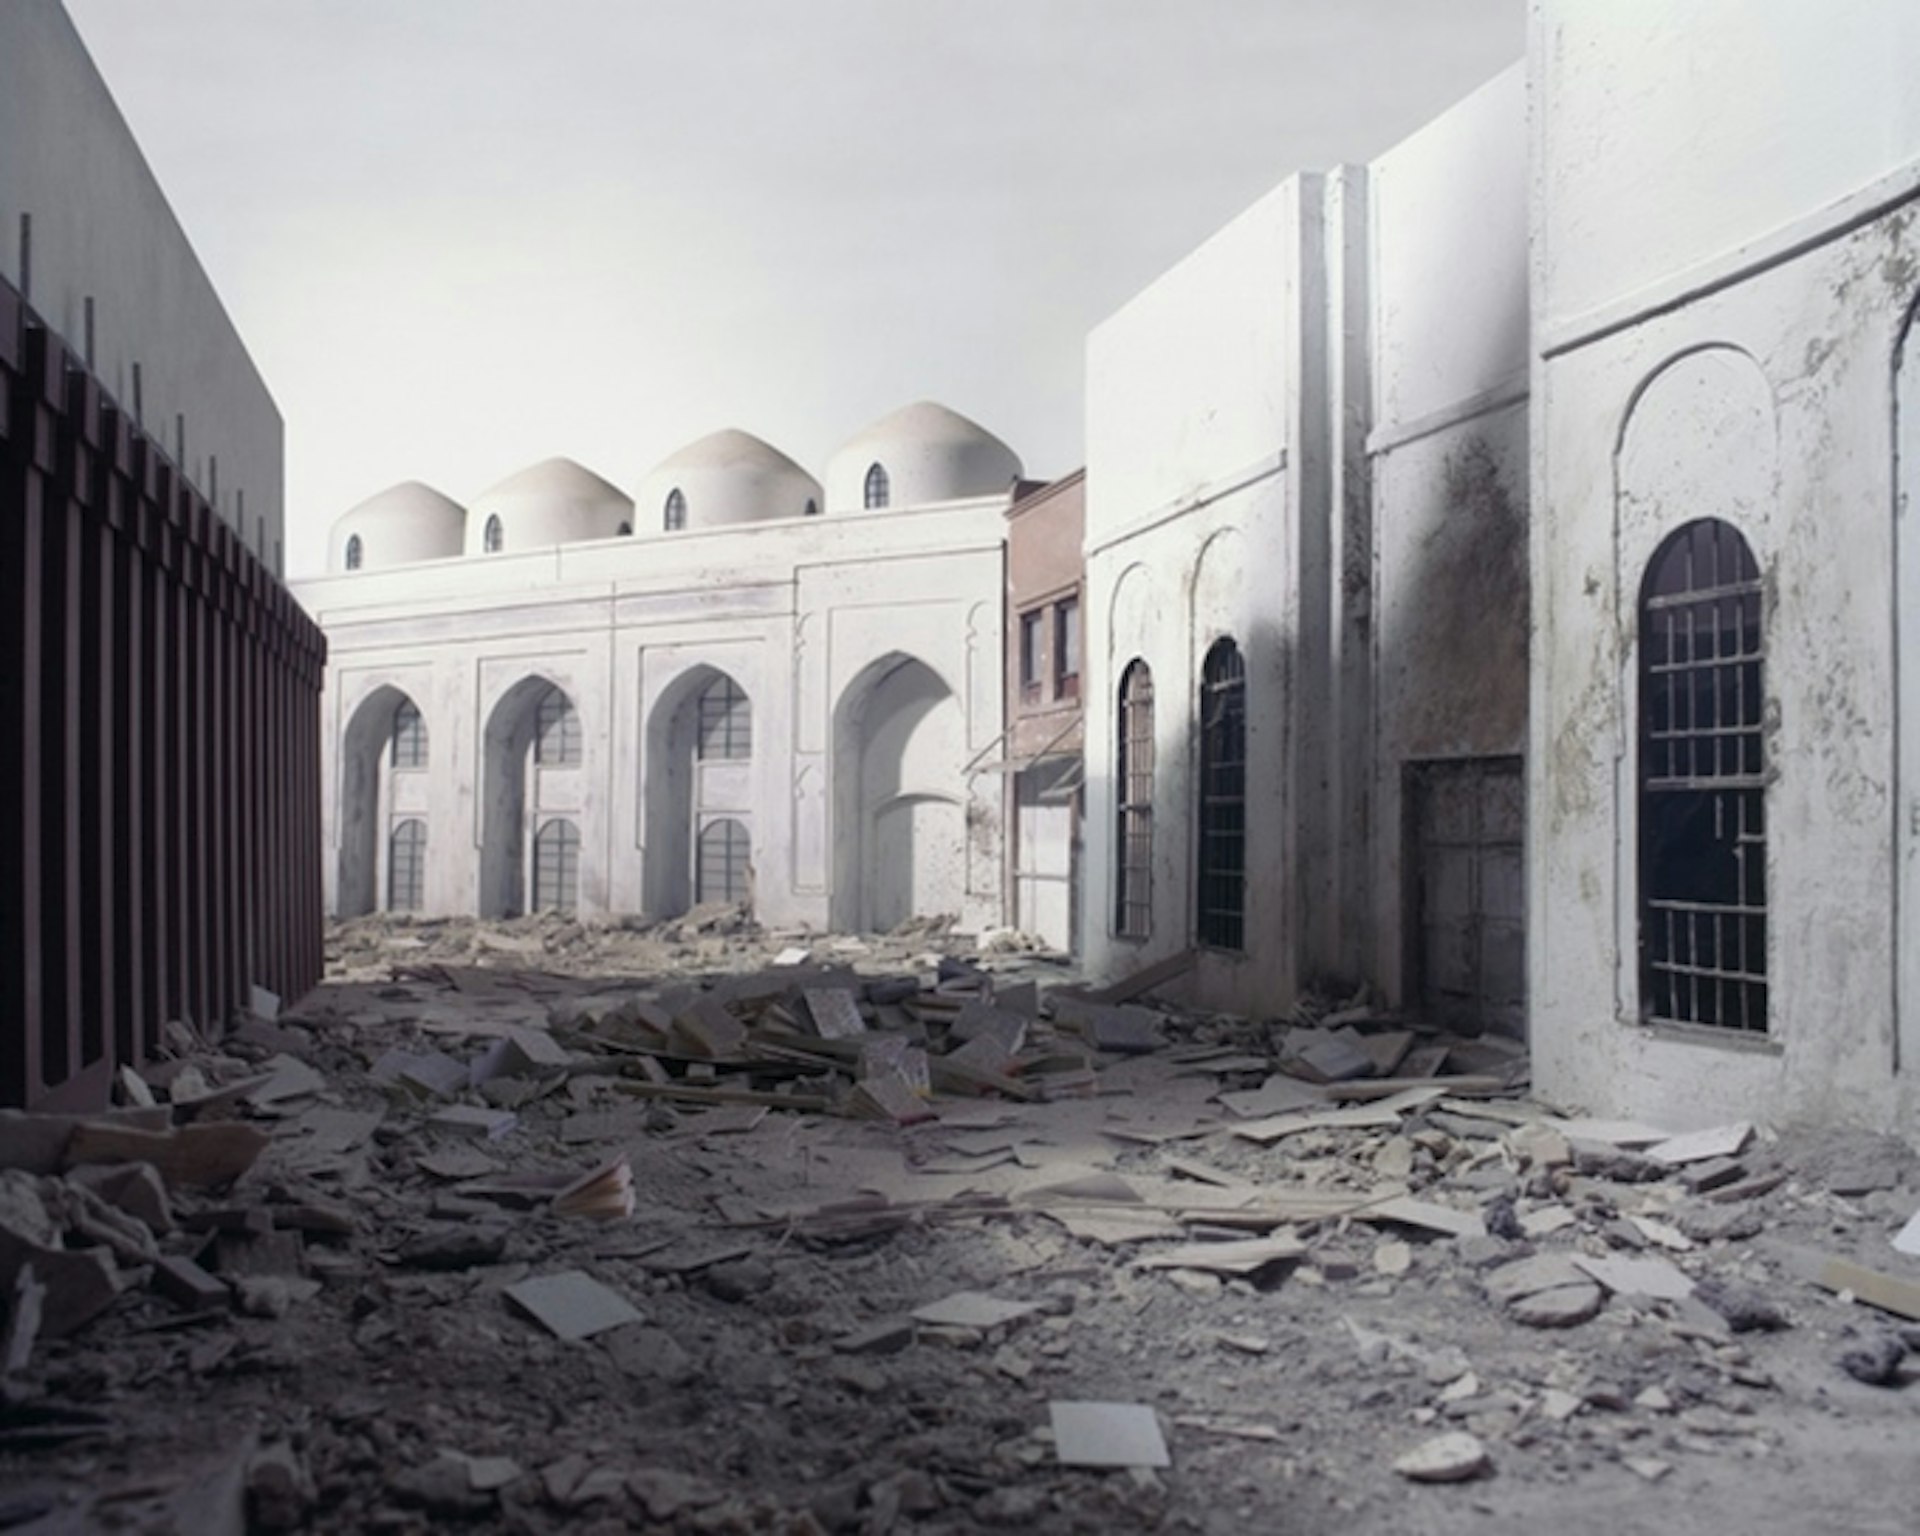 The Iraqi artist rebuilding Baghdad University’s destroyed art library